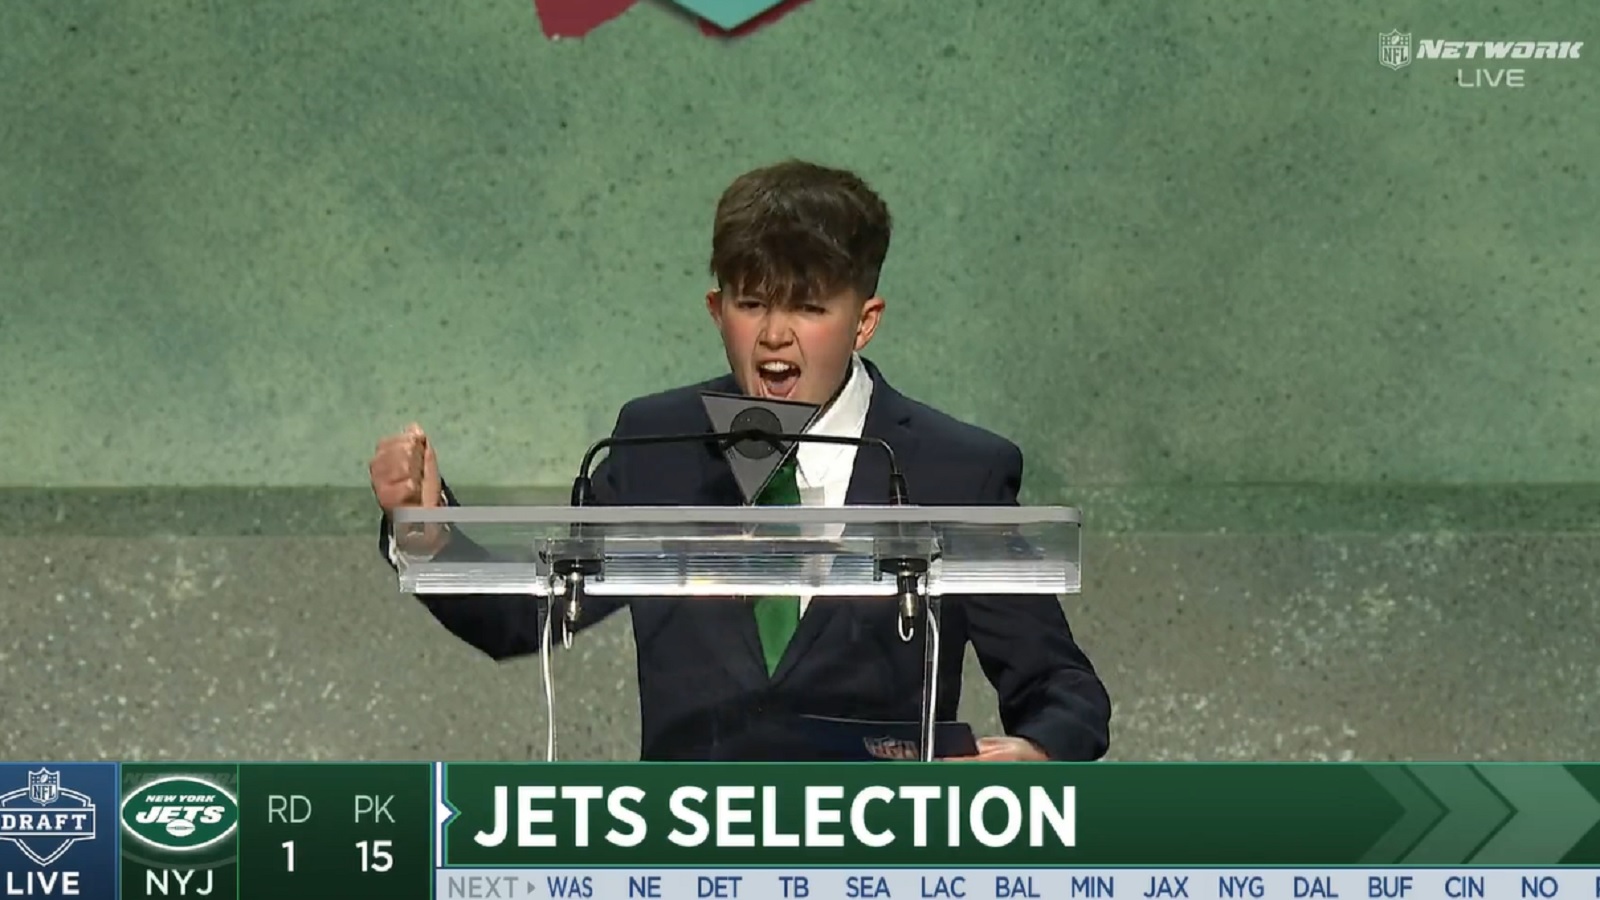 MakeAWish kid who announced Jets pick was star of the draft